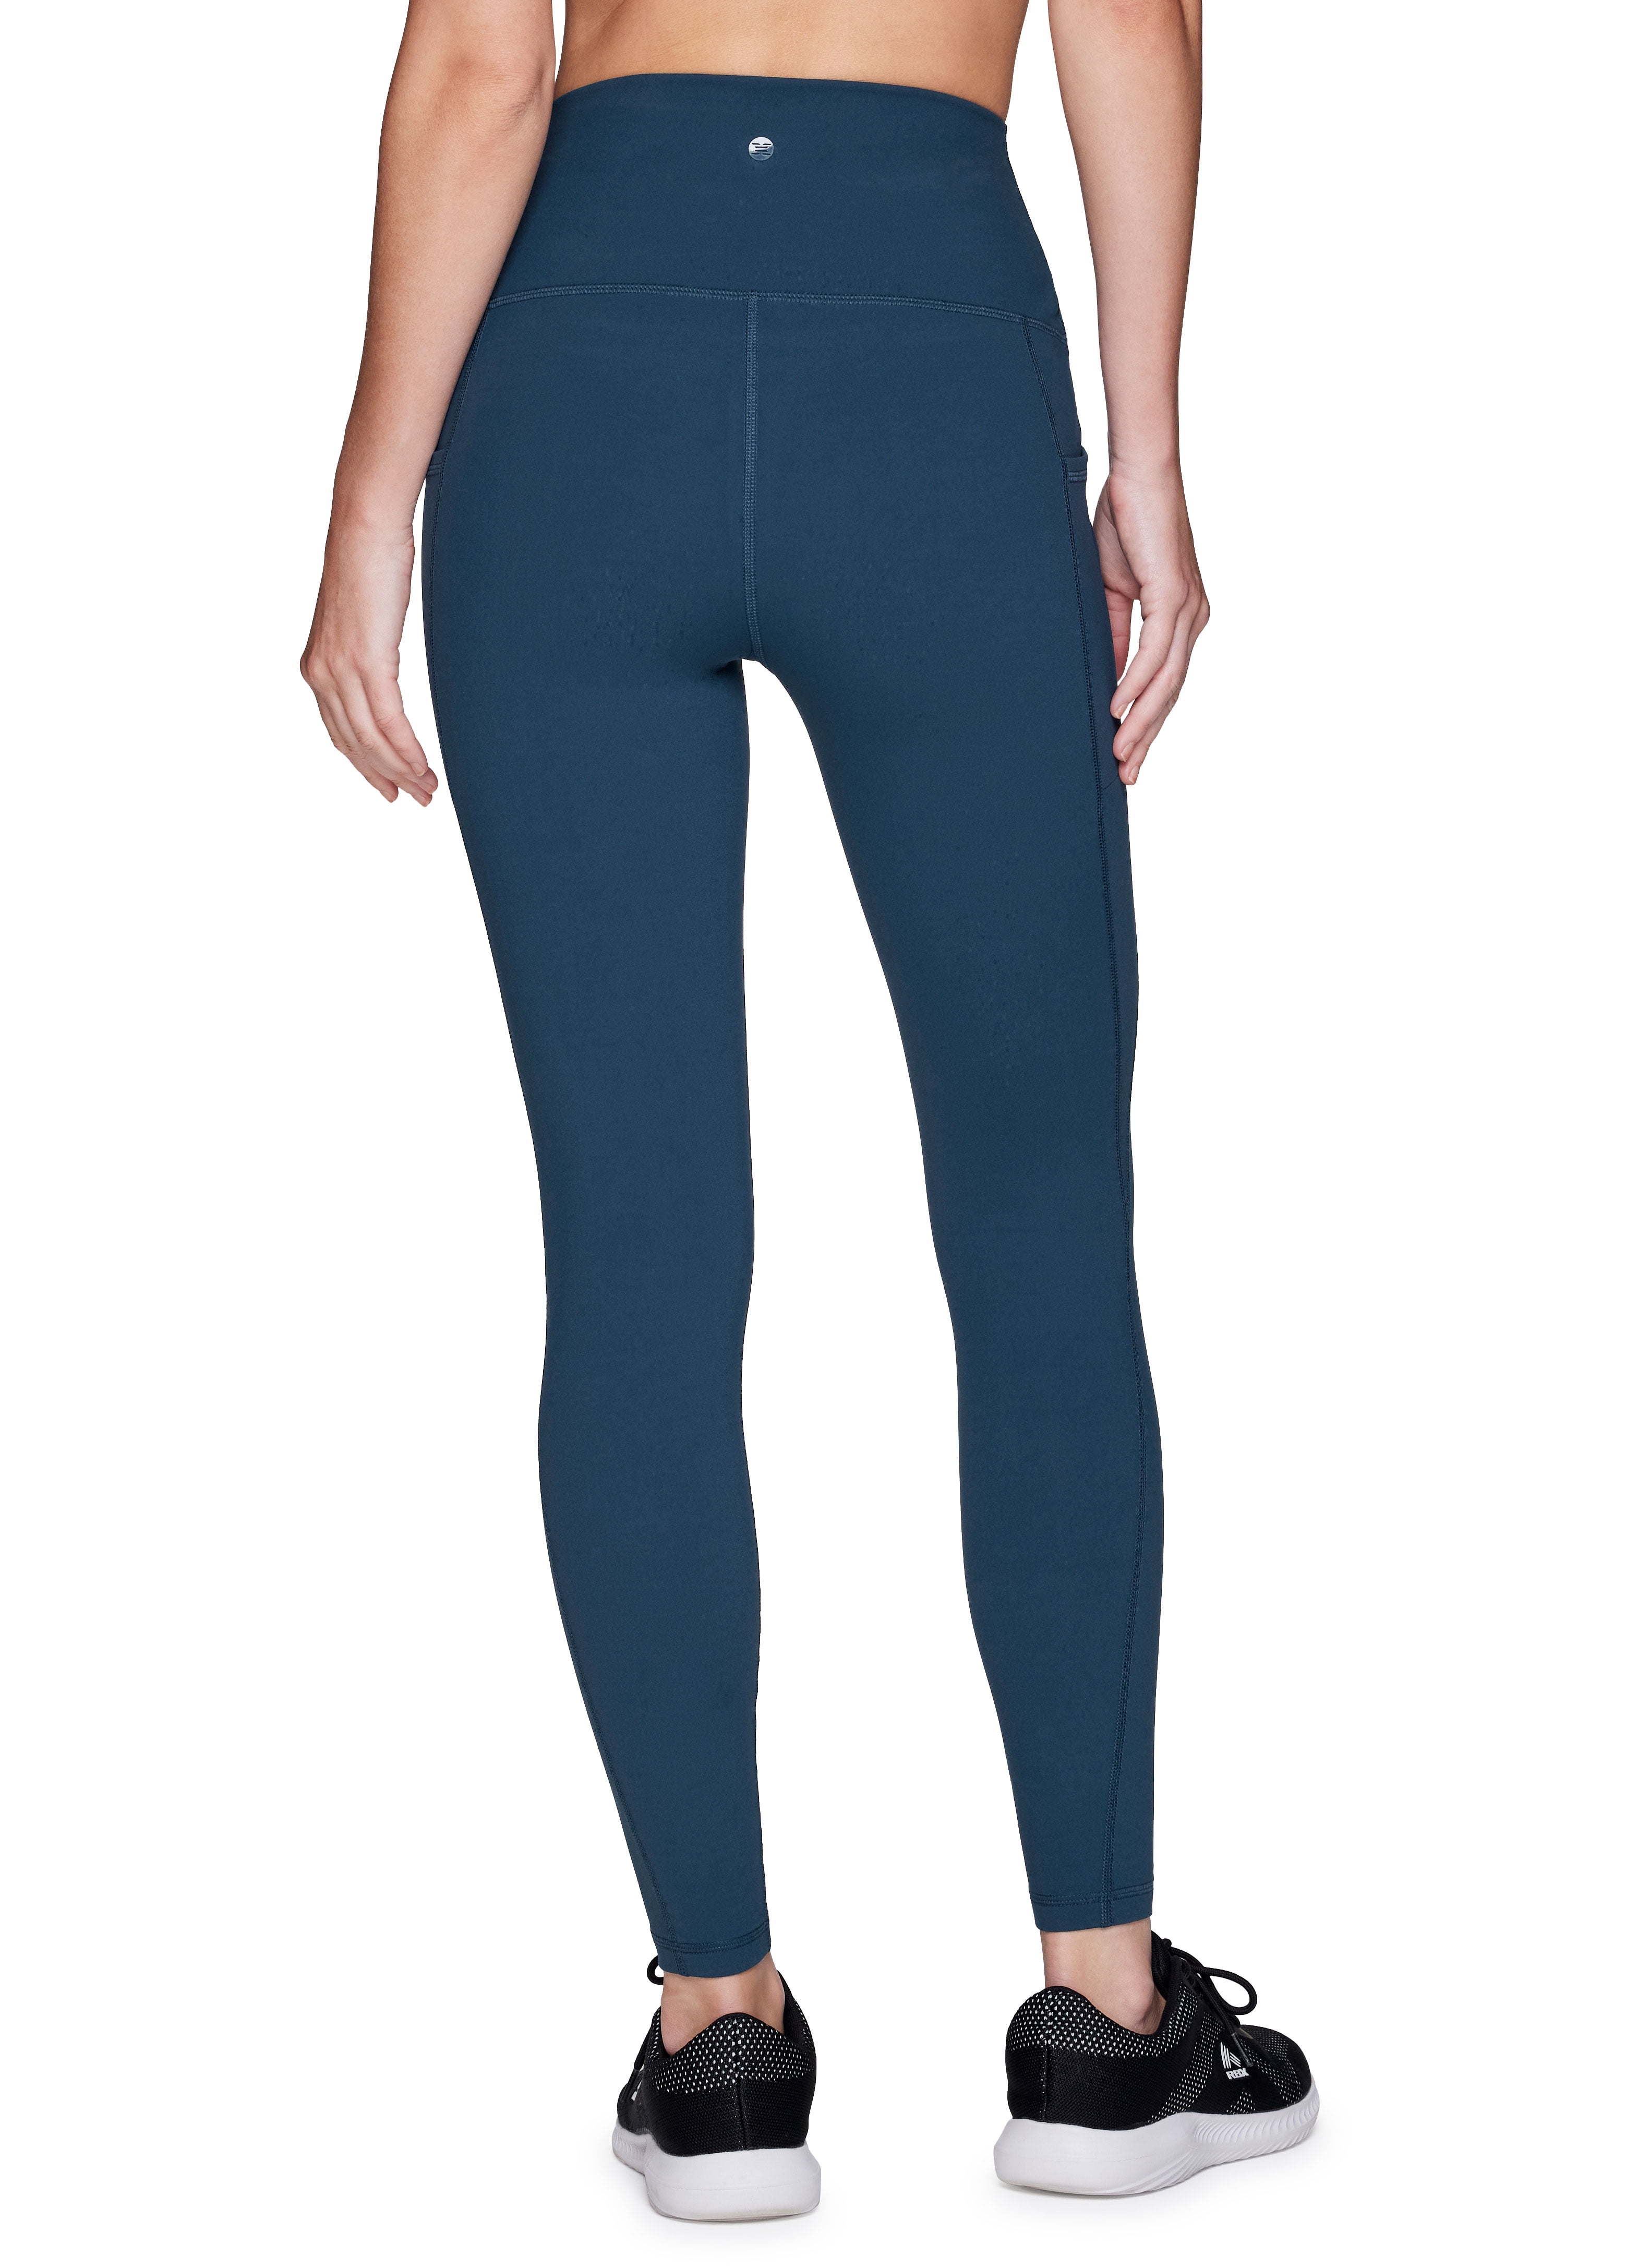 RBX Active Women's Full Length Ultra Soft High Impact Legging With Pockets  